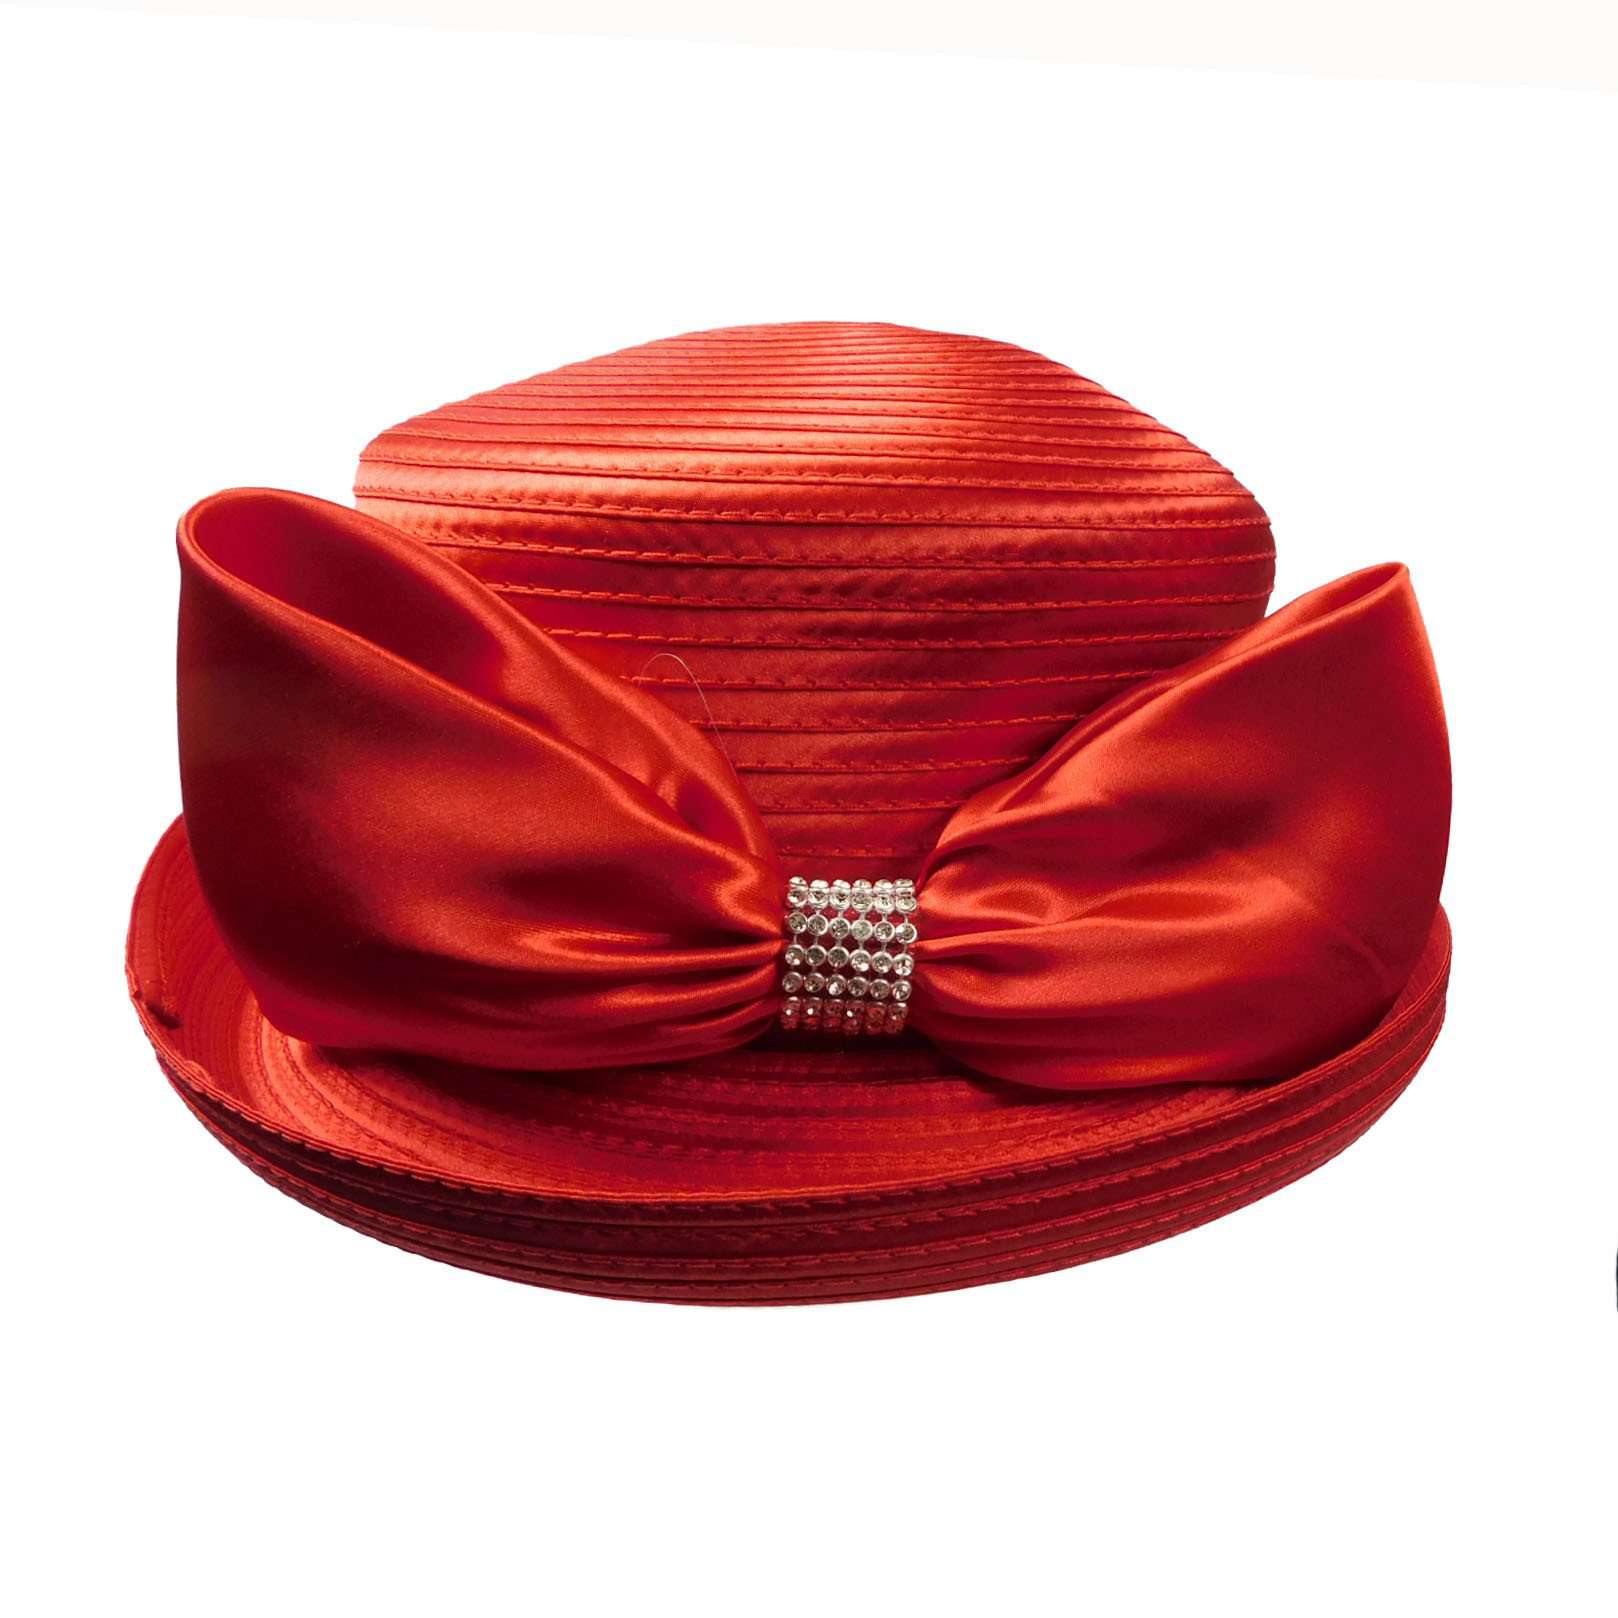 Satin Braid Bowler Style Church Hat with Bow and Rhinestone Loop Dress Hat Something Special LA WWSR802RD Red  